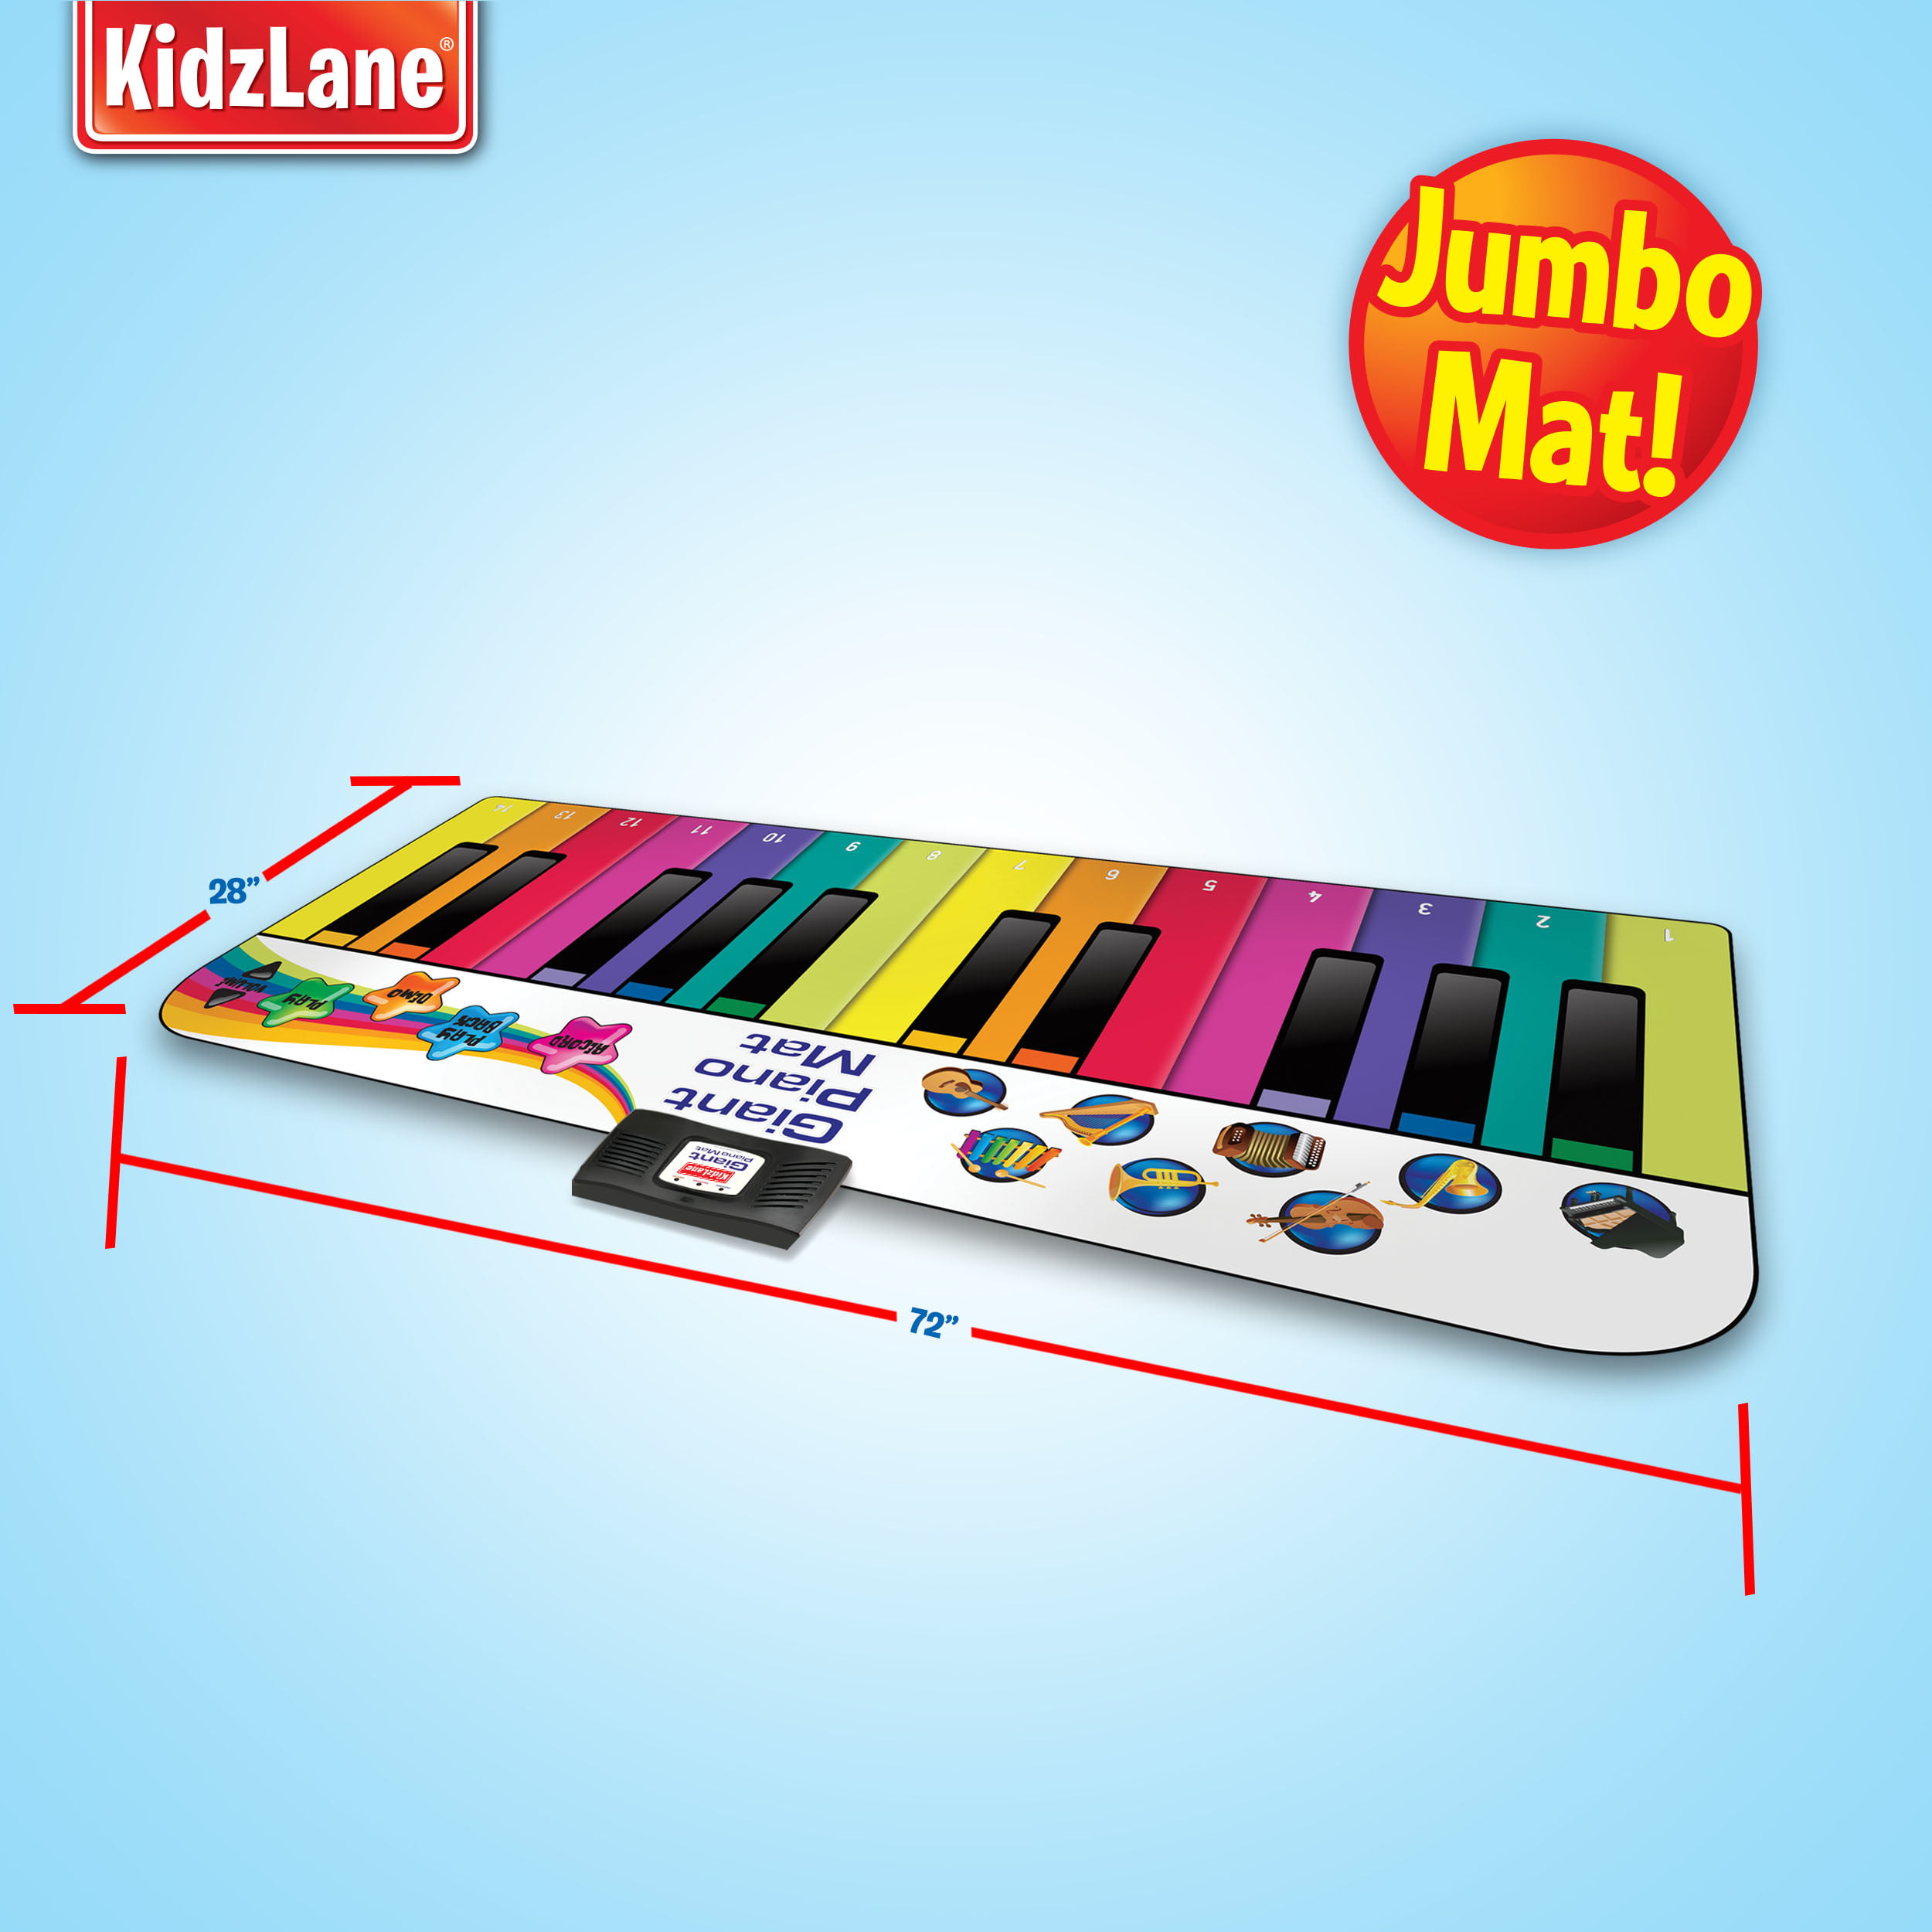 Jumbo 6 Foot Musical Keyboard Playmat for Toddlers Durable Piano Mat,10 note and 8 different instruments for Kids 2 to 5 TriLance Floor Piano Mat Dance and Learn